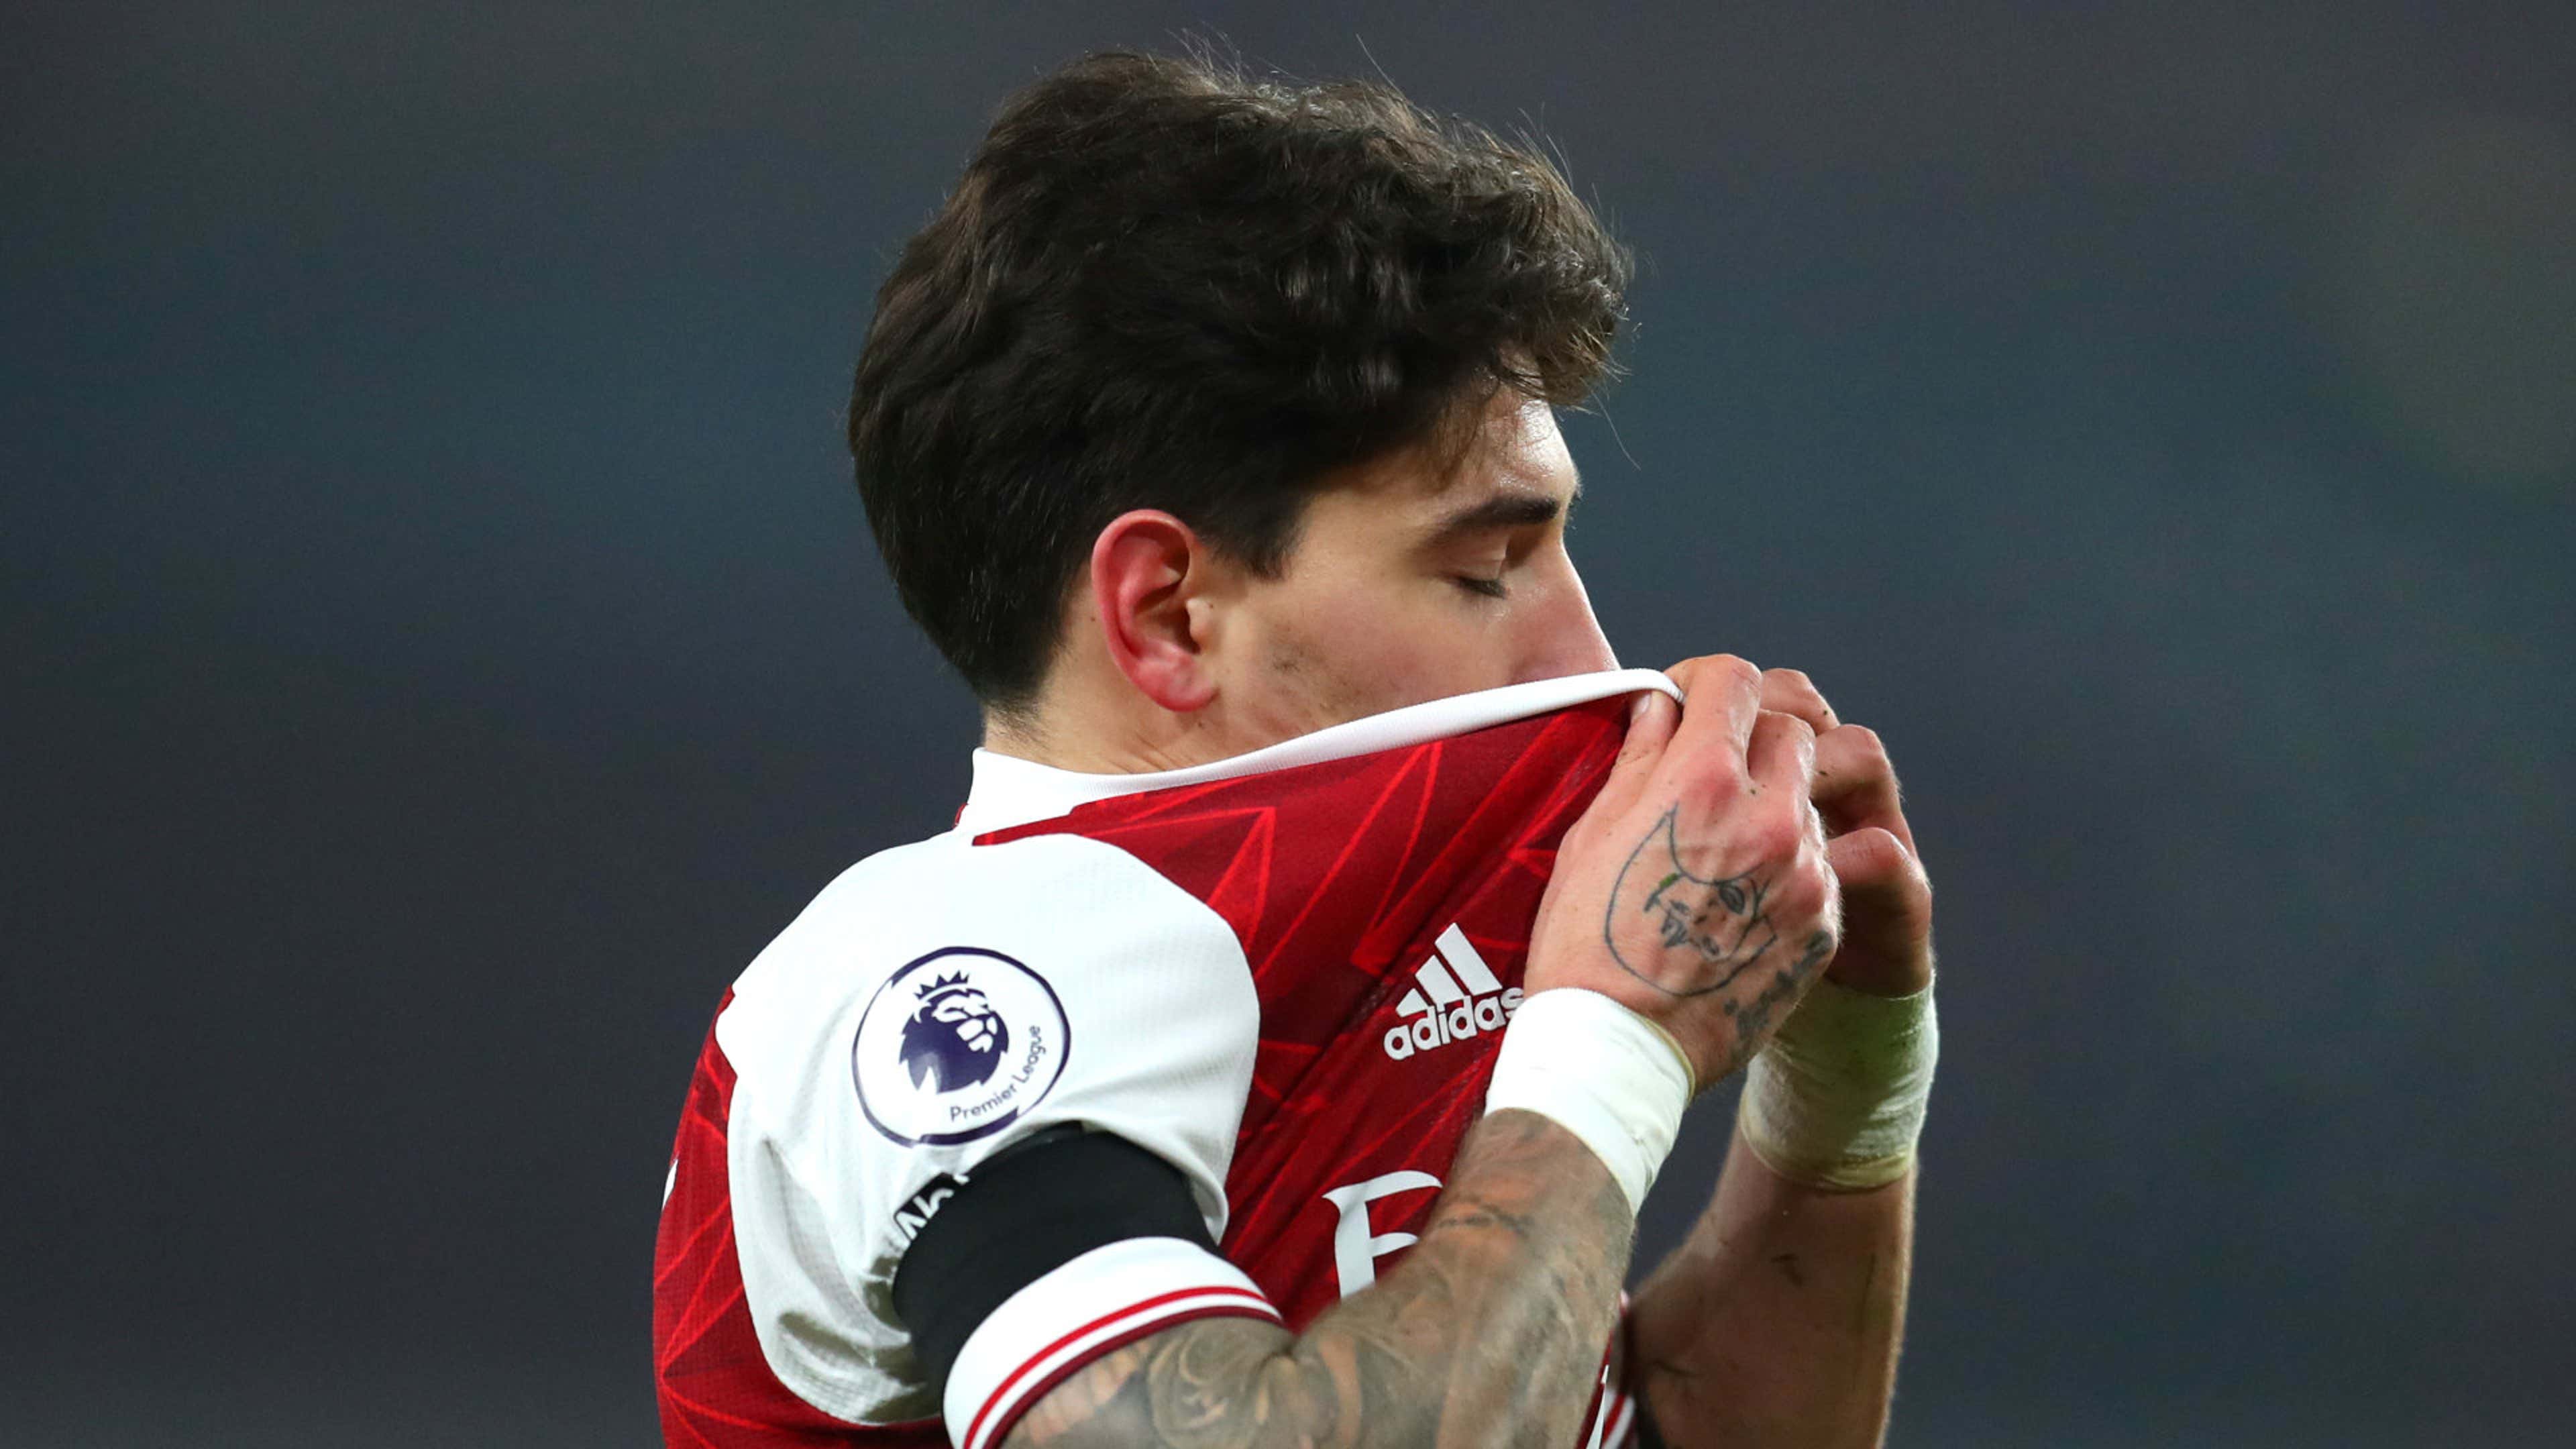 The three clubs that want Arsenal's Hector Bellerin